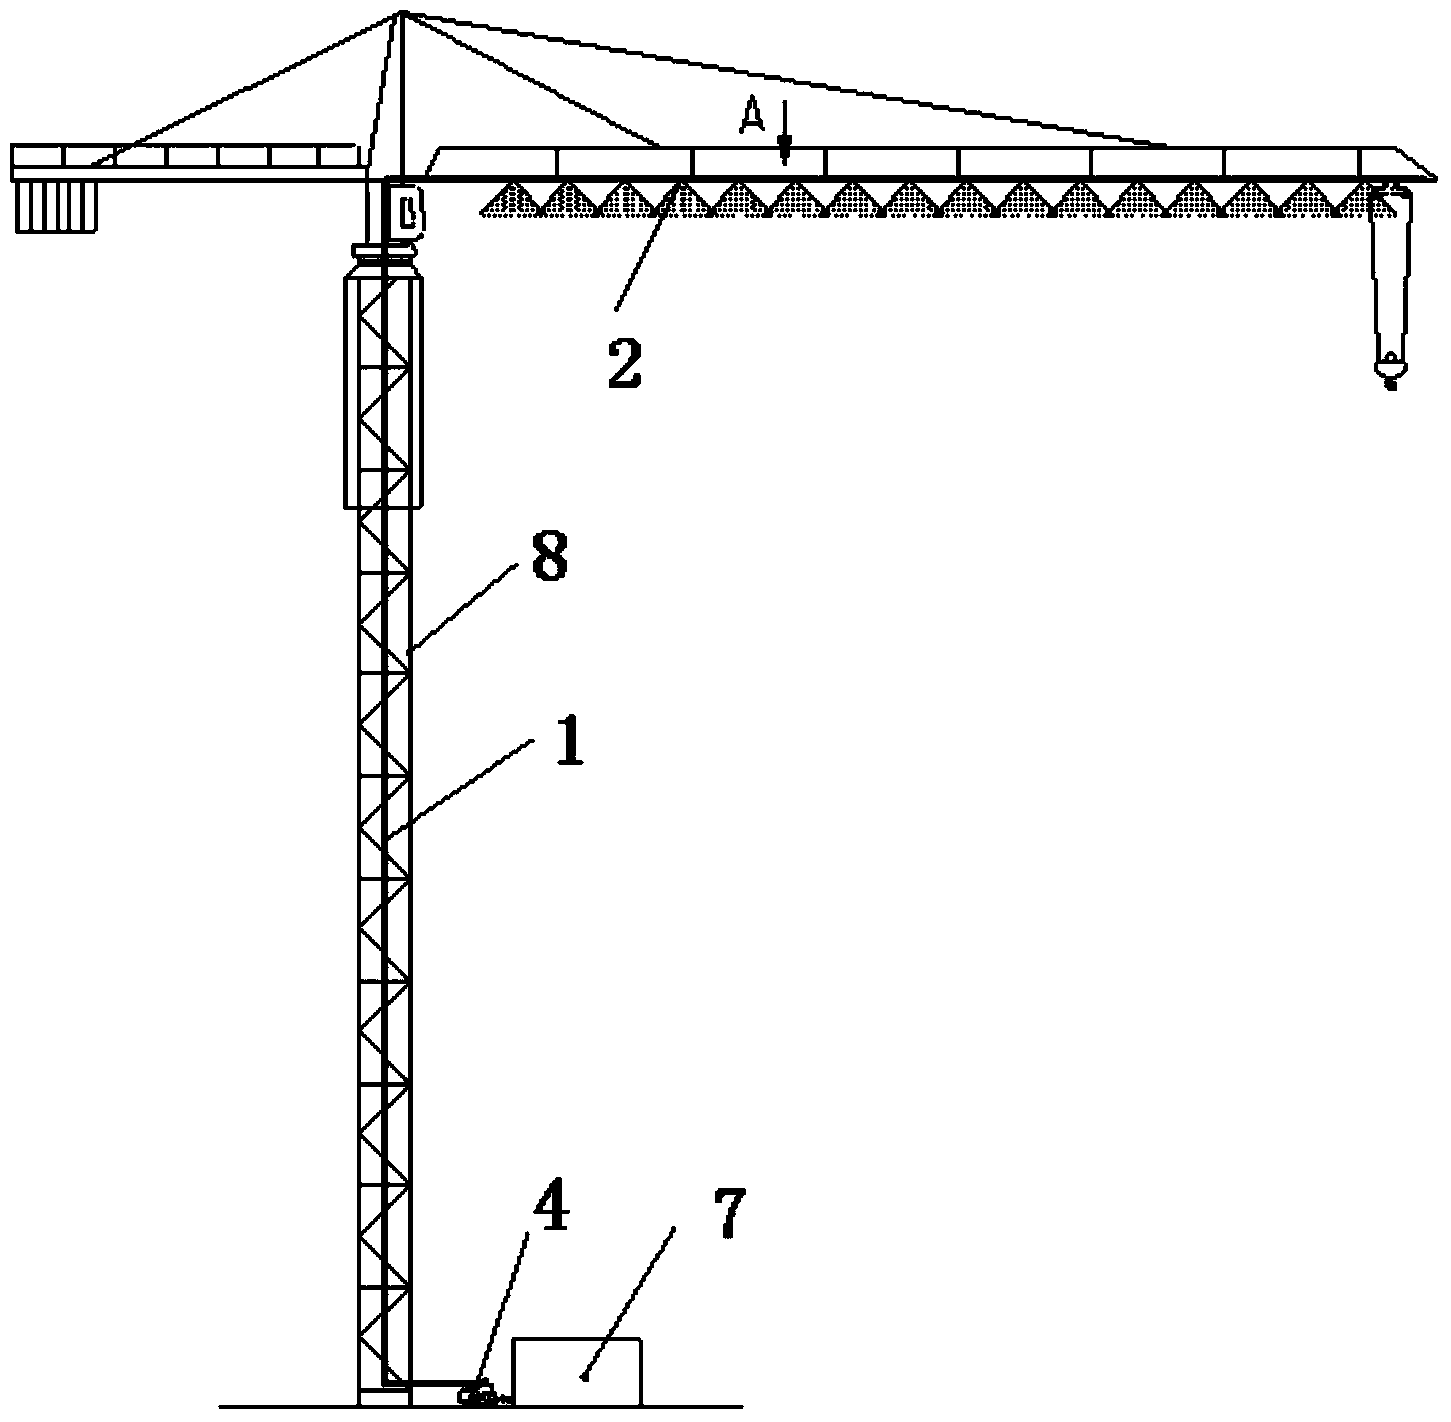 Concrete curing device and tower crane